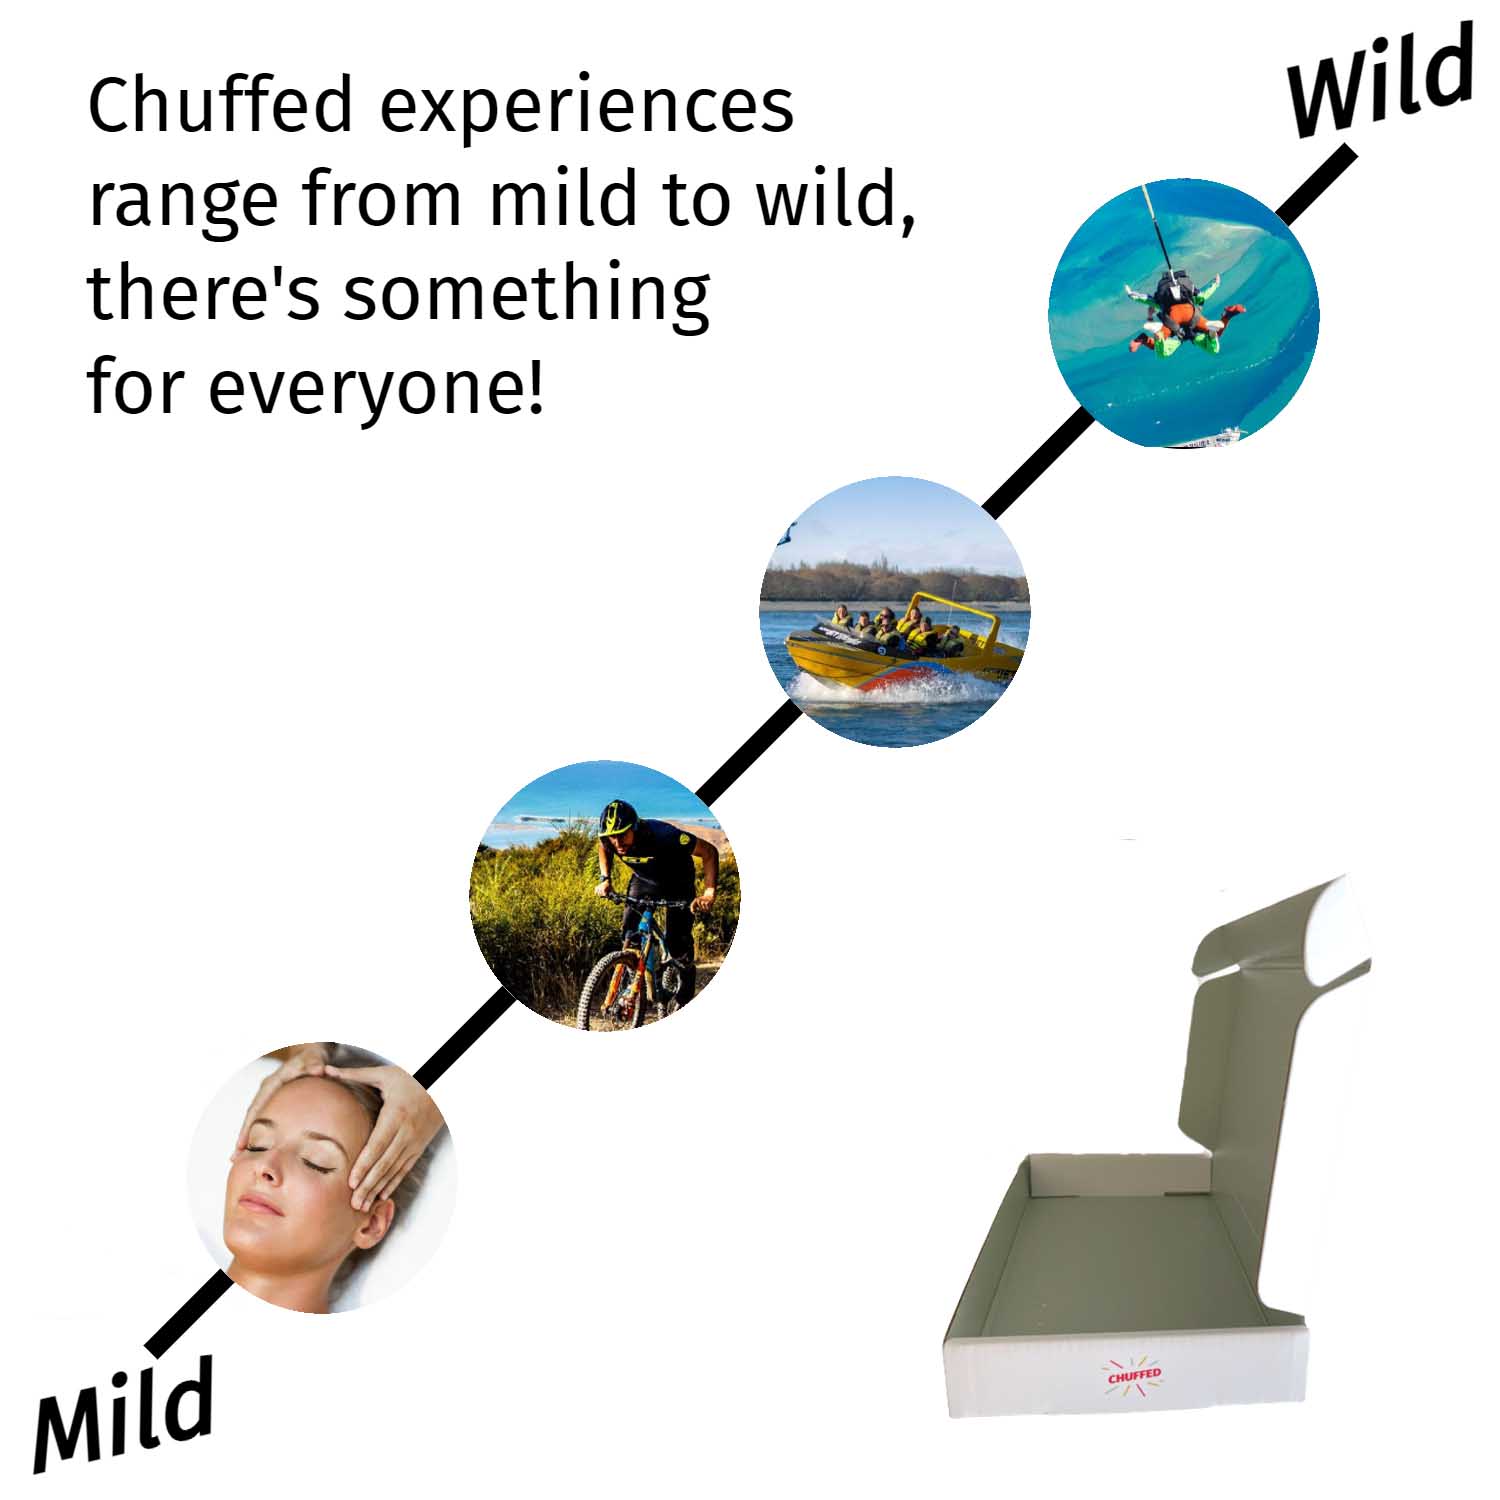 Experiences from mild to wild - so something for everyone!